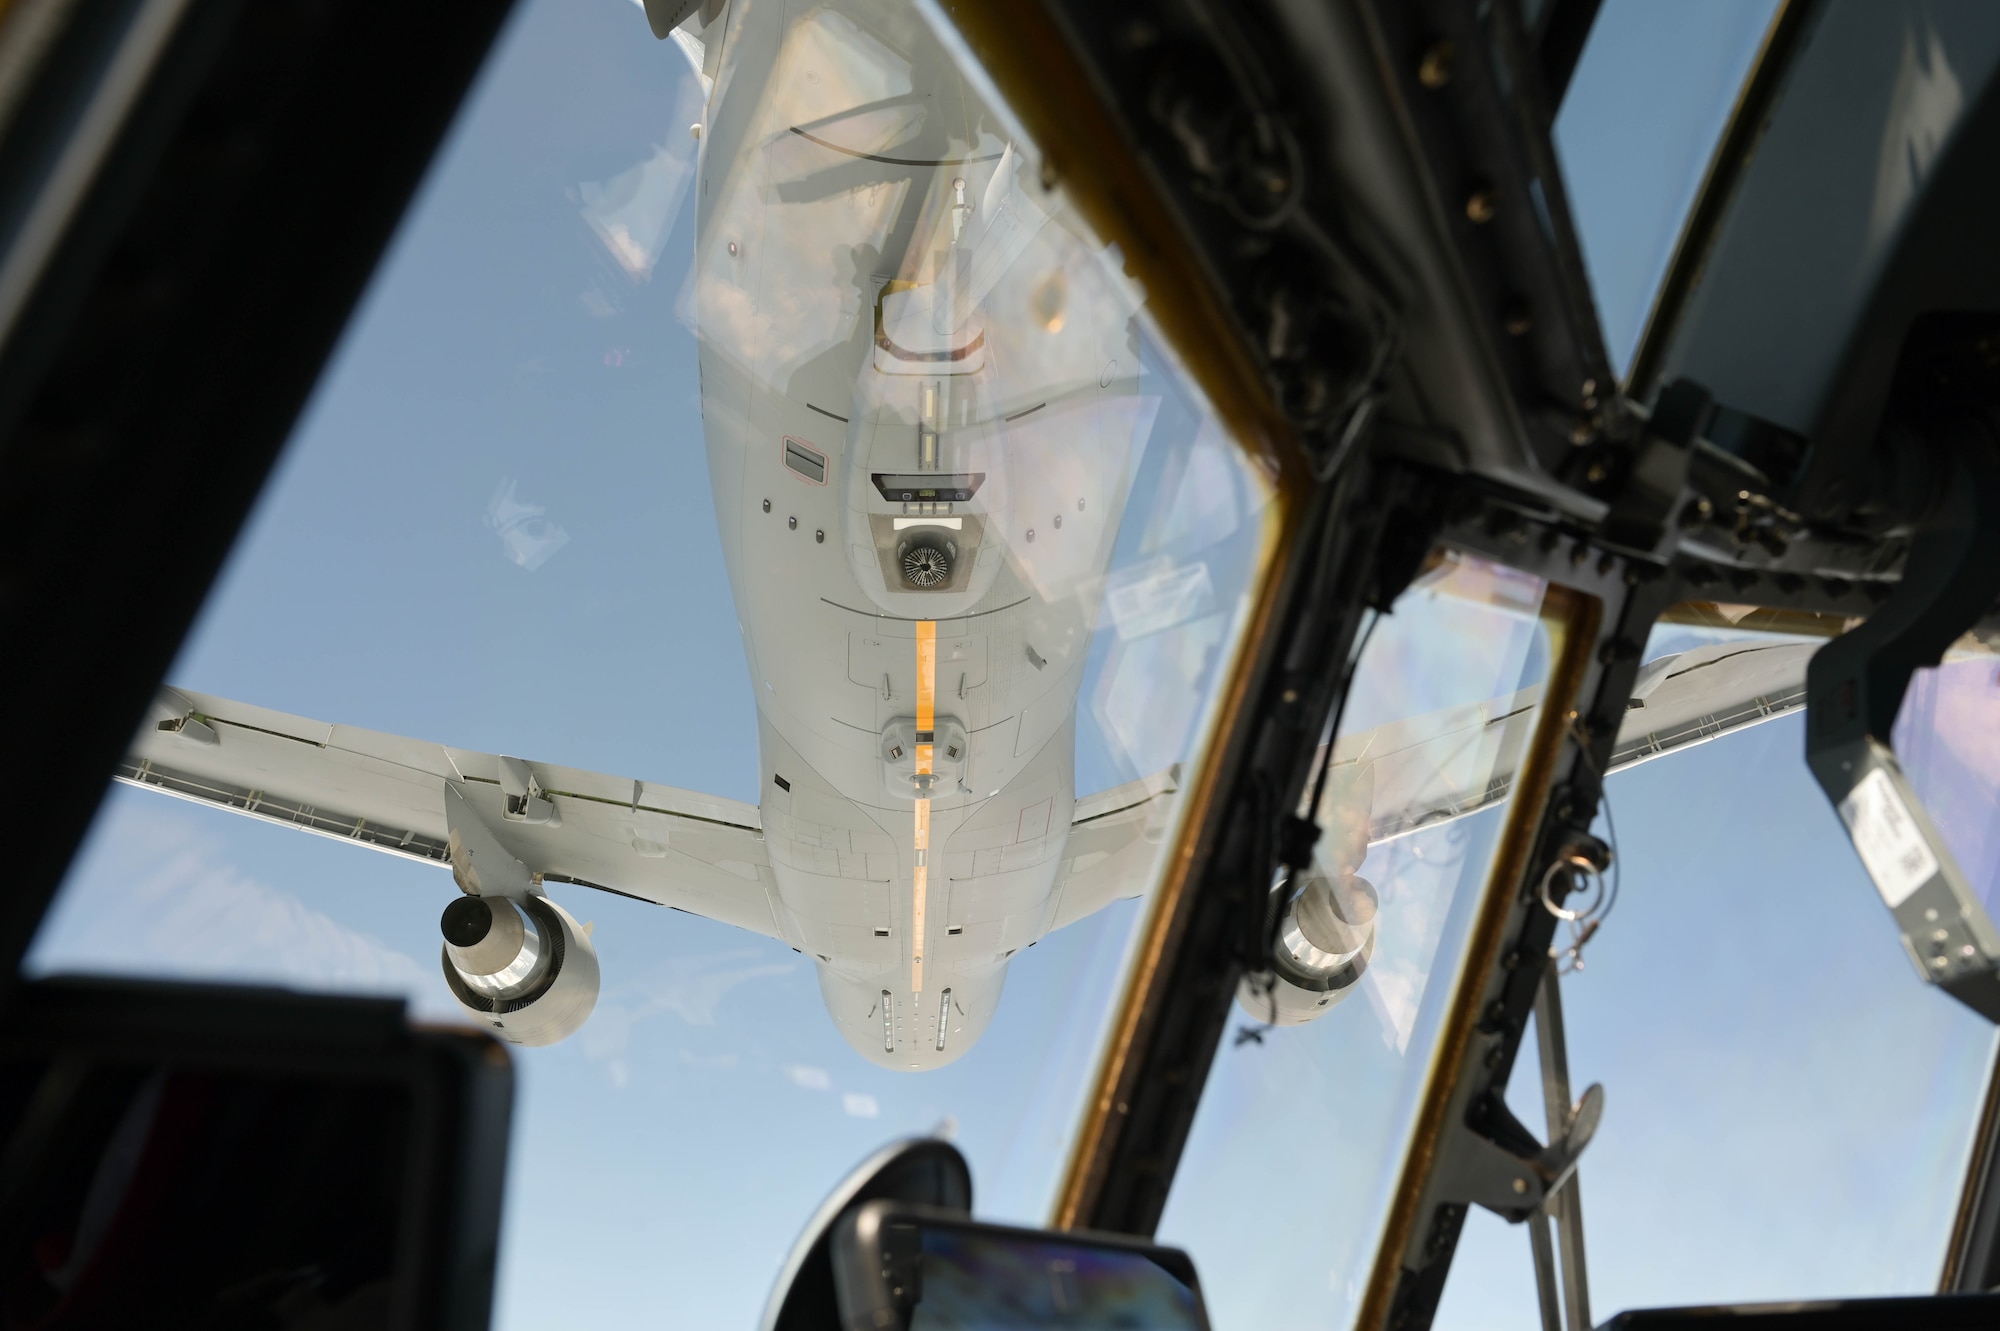 U.S. Air Force KC-46A Pegasus pilots assigned to the 916th Air Refueling Wing, Seymour Johnson Air Force Base, North Carolina, provide fuel for an HC-130J Combat King II aircraft assigned to the 71st Rescue Squadron, Moody Air Force Base, Georgia, during a flight near Moody AFB, Aug. 24, 2021. Air-to-air refueling allows aircraft to travel greater distances without needing to land, which enables Airmen to accomplish prolonged operations. The 71st RQS is the first operational unit to be refueled by the KC-46A Pegasus. (U.S. Air Force photo by Senior Airman Rebeckah Medeiros)